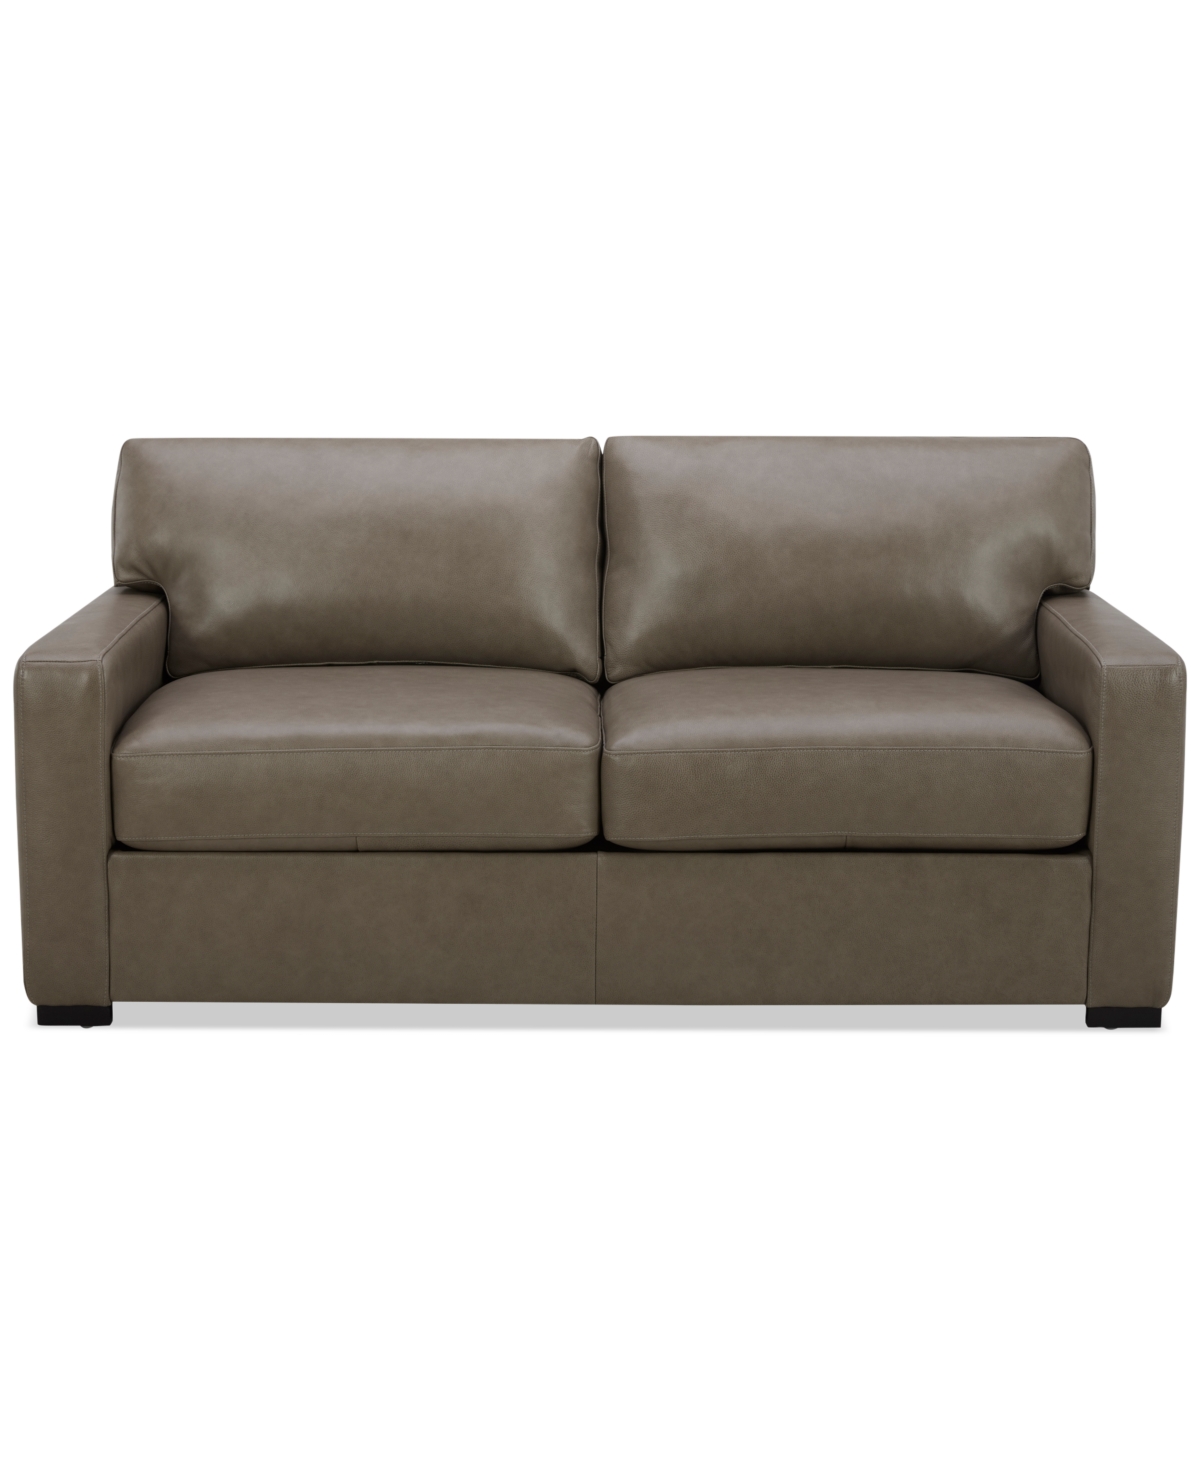 Macy's Radley 74" Leather Apartment Sofa, Created For  In Taupe